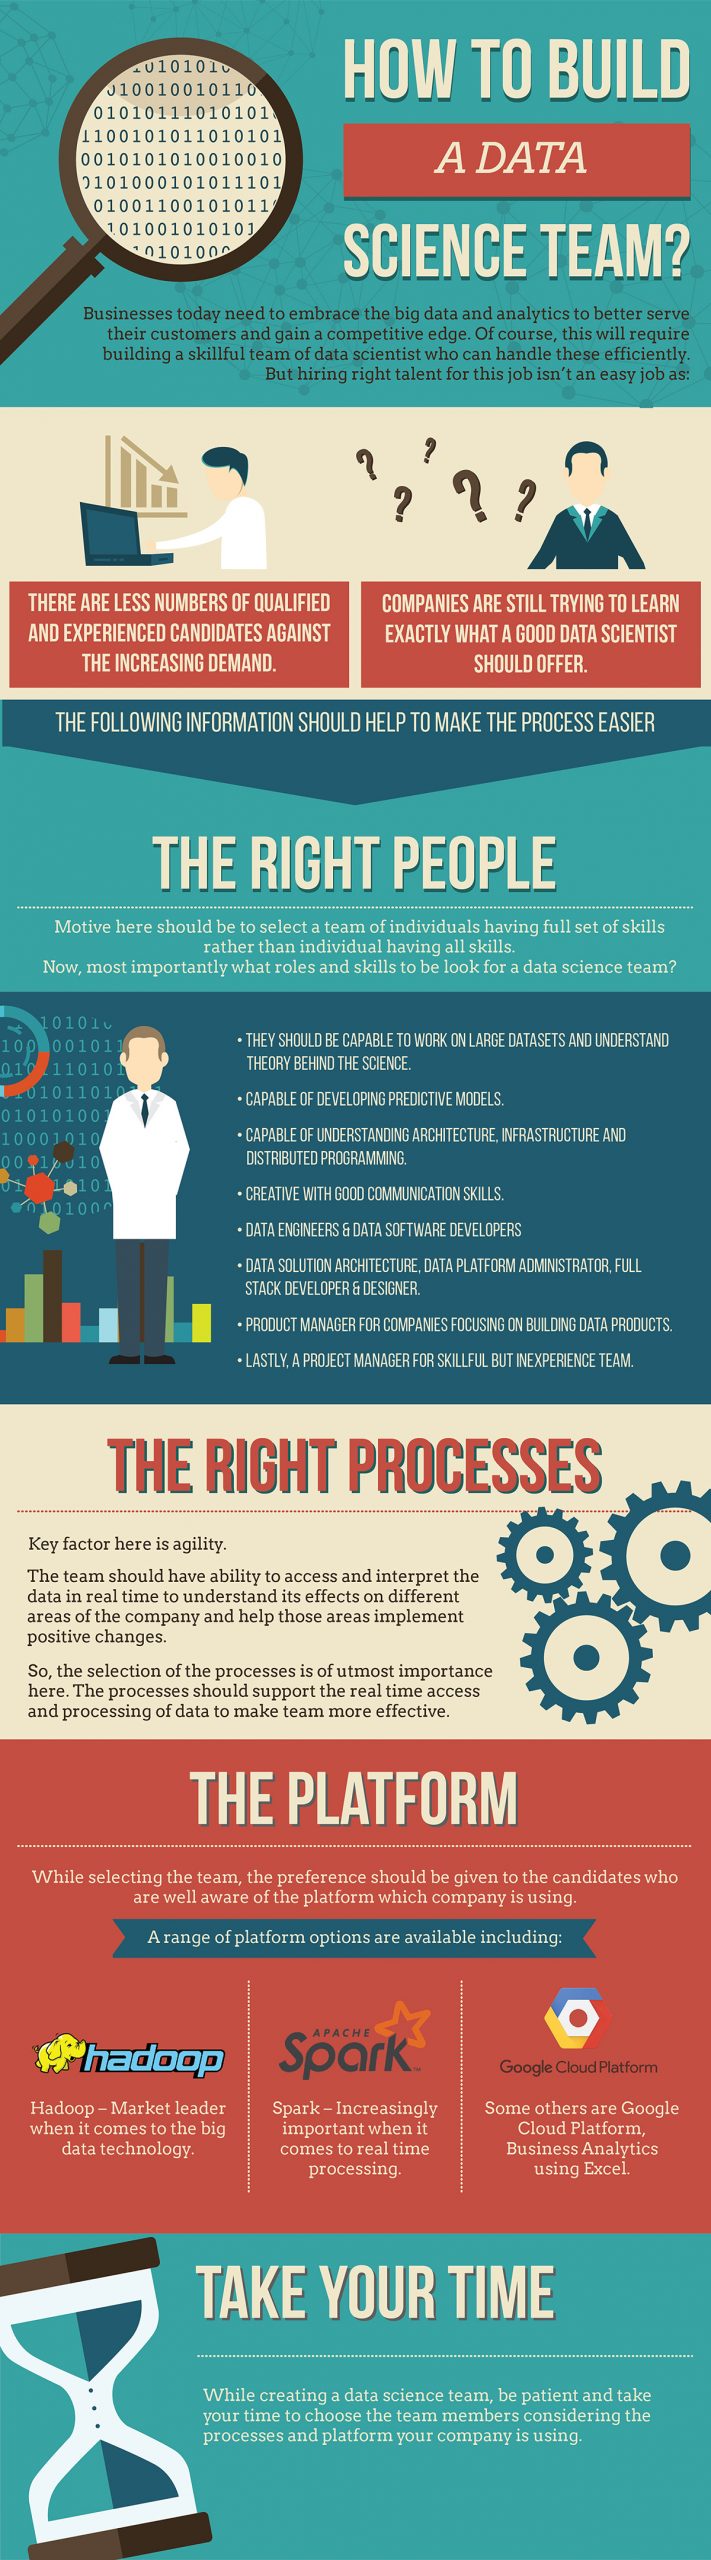 How to Build a Data Science Team infographic